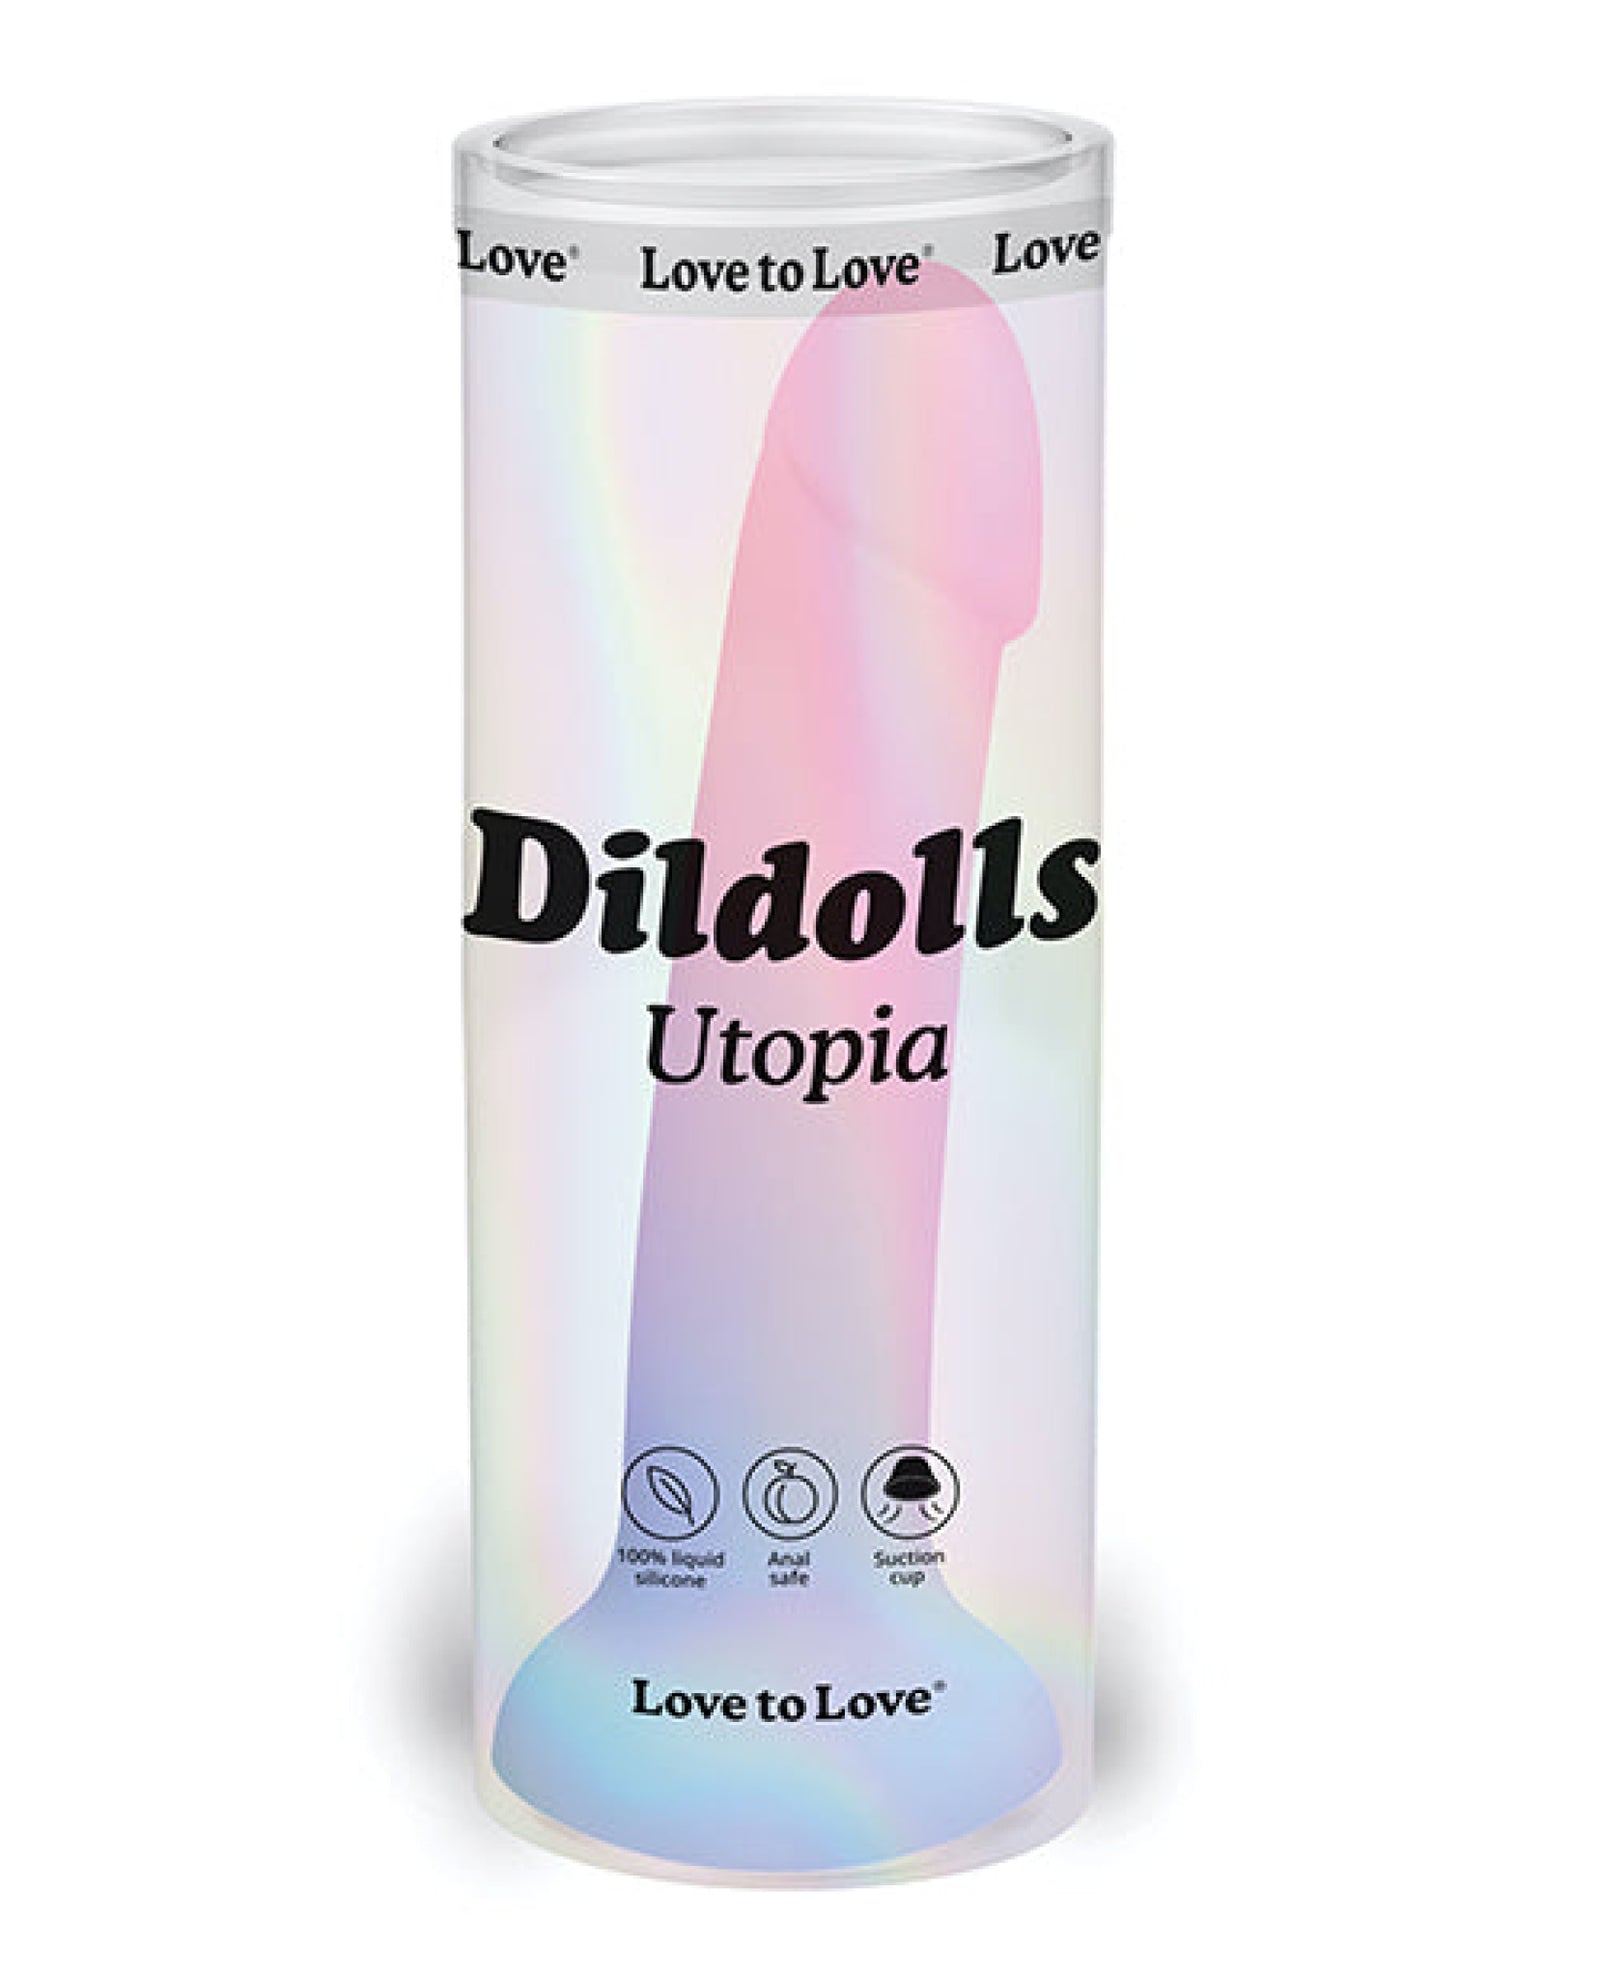 Love To Love Curved Suction Cup Dildolls Utopia - Asst Colors Love To Love